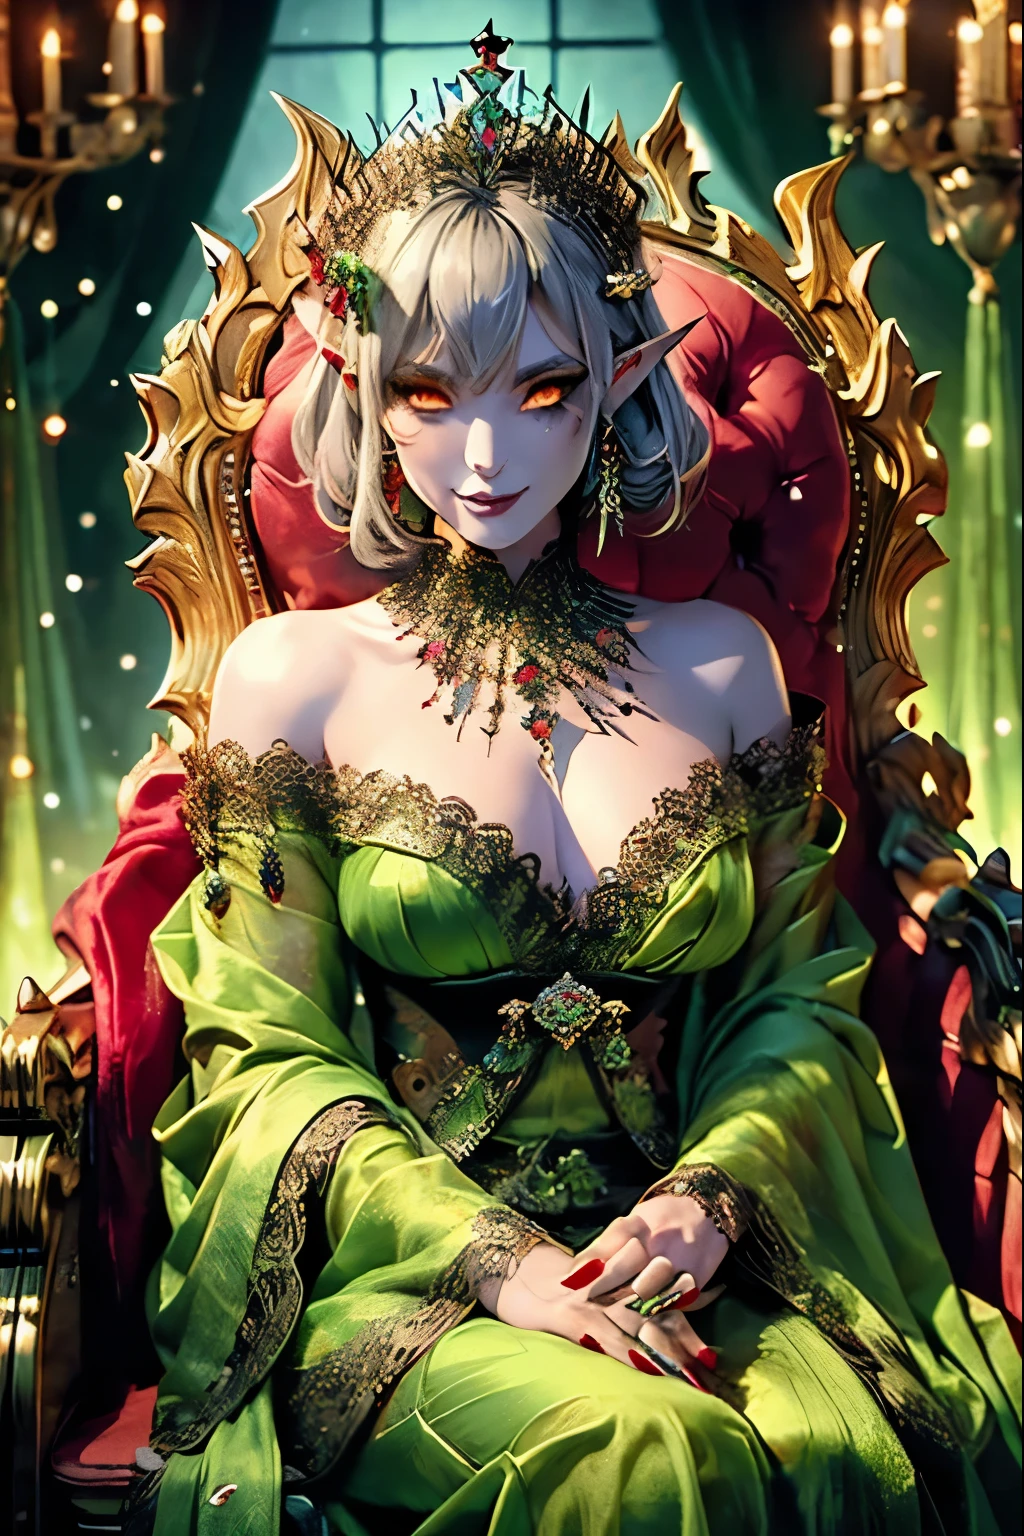 (Ultra-detailed face, Brutal eyes), (Fantasy Illustration with Gothic & Ukiyo-e & Comic Art), (Full Body, A middle-aged ice elf woman with silver hair, blunt bangs, very very long disheveled hair, and silver skin, Eyes burning yerrow), (The queen wears a jade tiara, a large jeweled necklace and earrings, a long lacy deep green silk dress, and jeweled green sandals), (The green demon queen lies on a huge, tall throne, hands on her cheeks and a brutal smile on her face), BREAK (An opulent, tall, gigantic gothic throne of glittering splendor, adorned with gems and precious metals. It looks dark:1.2), (In the background, long curtains and many candelabras line either side of the queen's throne in the royal palace)